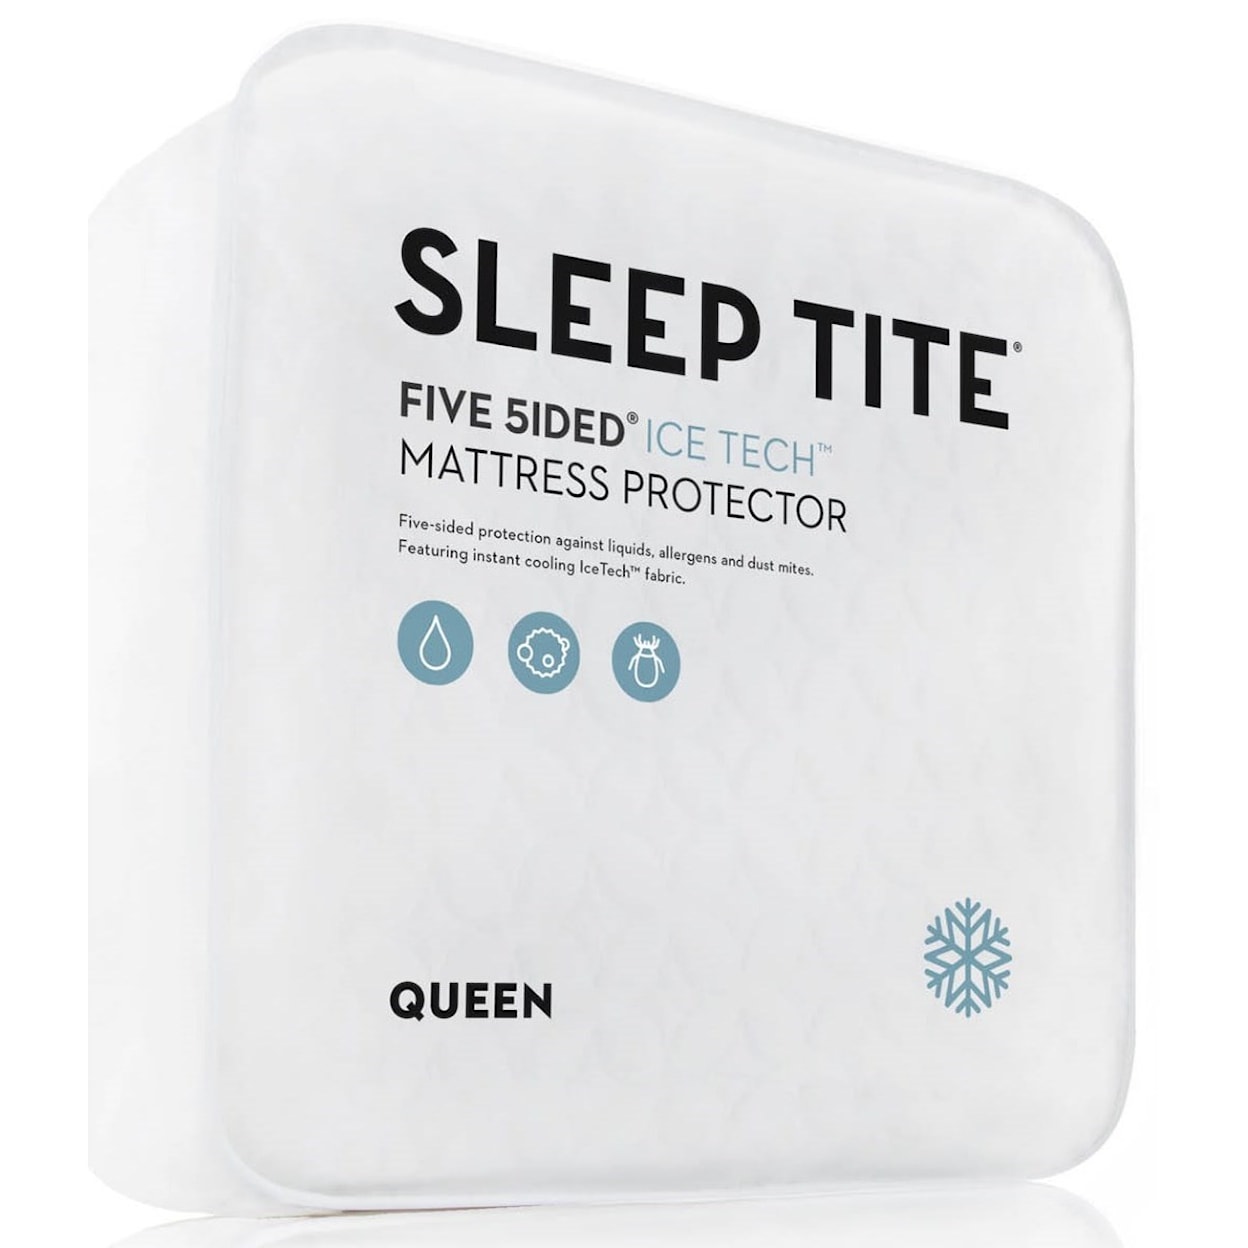 Malouf Five 5ided IceTech King Five 5ided IceTech Mattress Protector